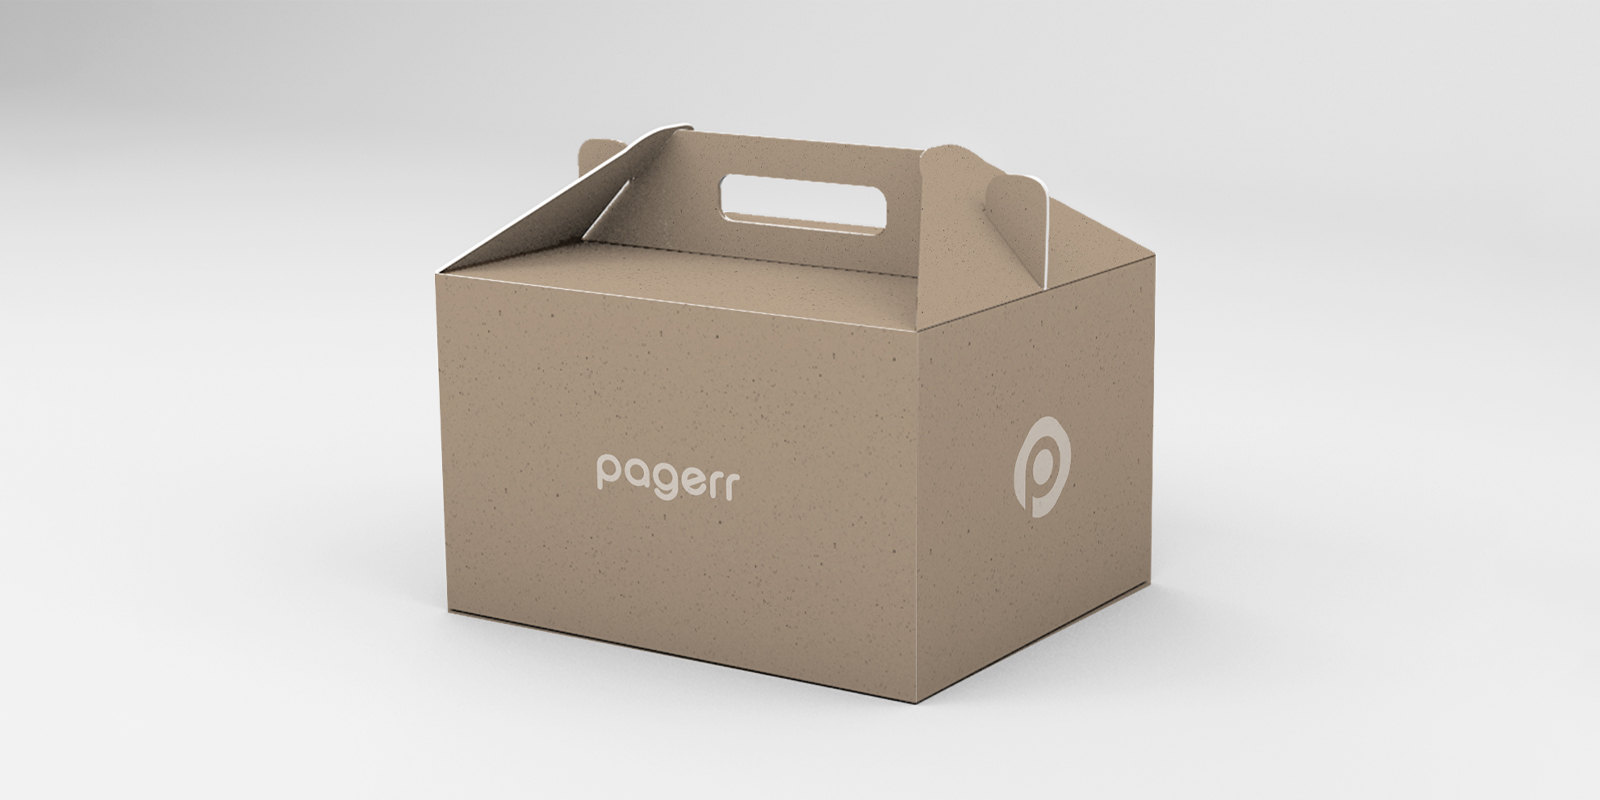 Takeaway boxes in Brisbane - Print with Pagerr